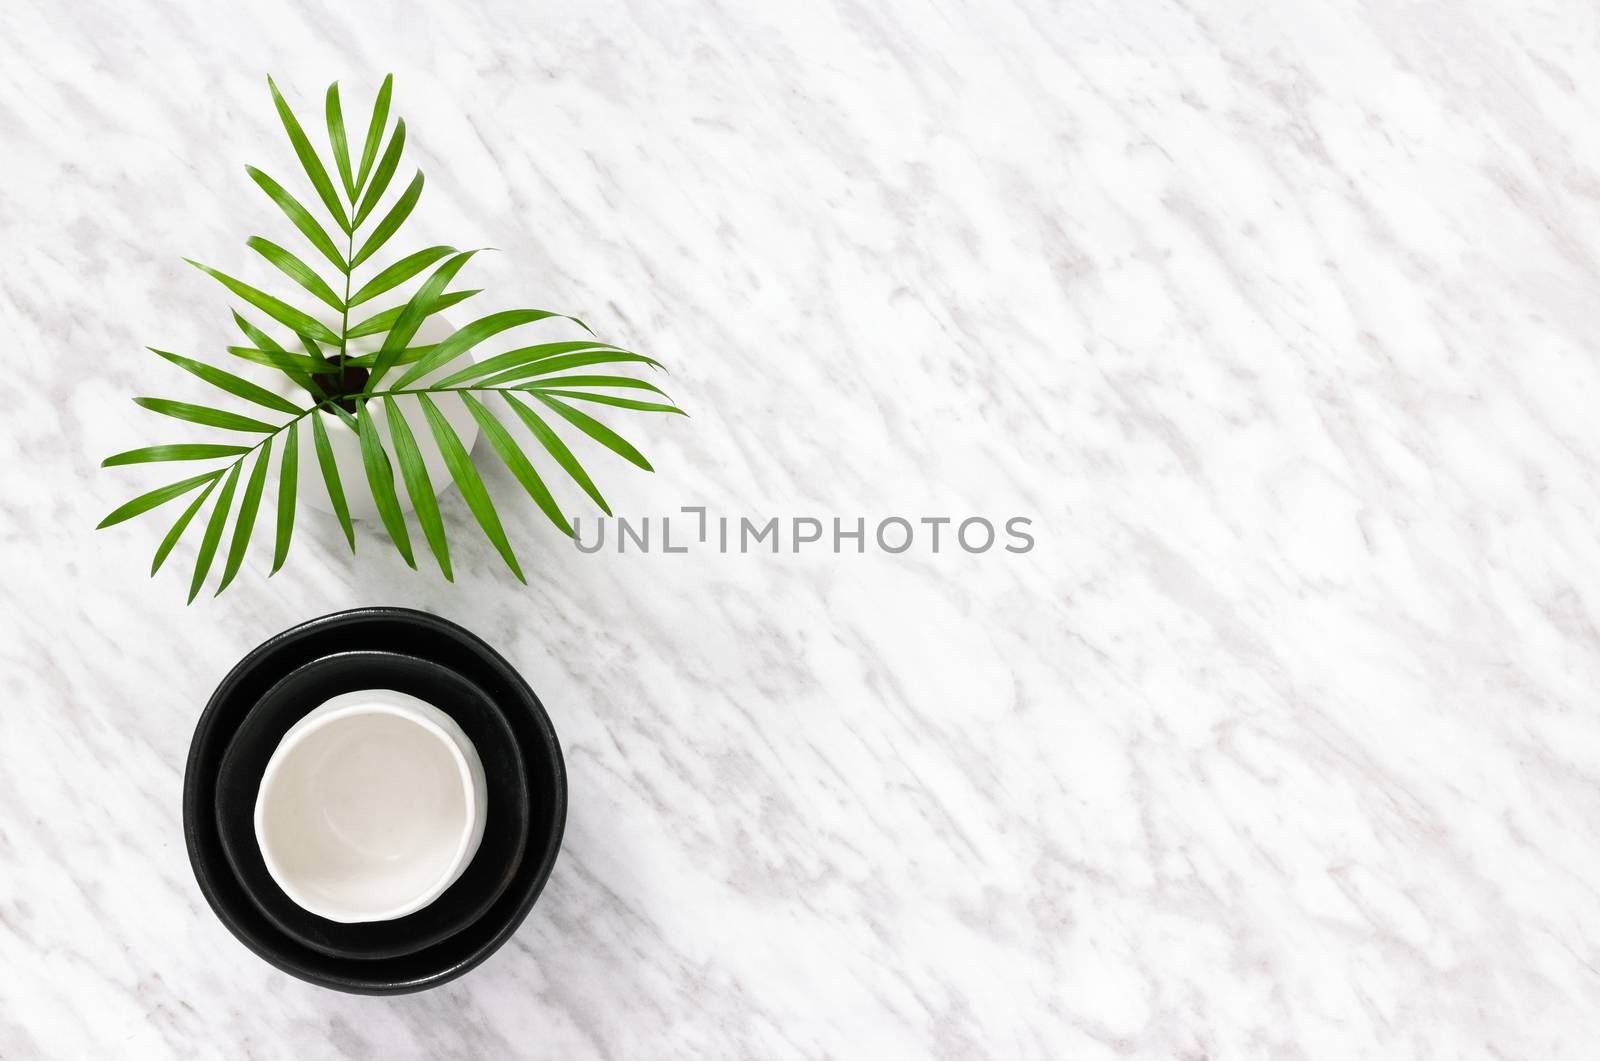 Black and white ceramics and palm leaves, on marble background with copy space.